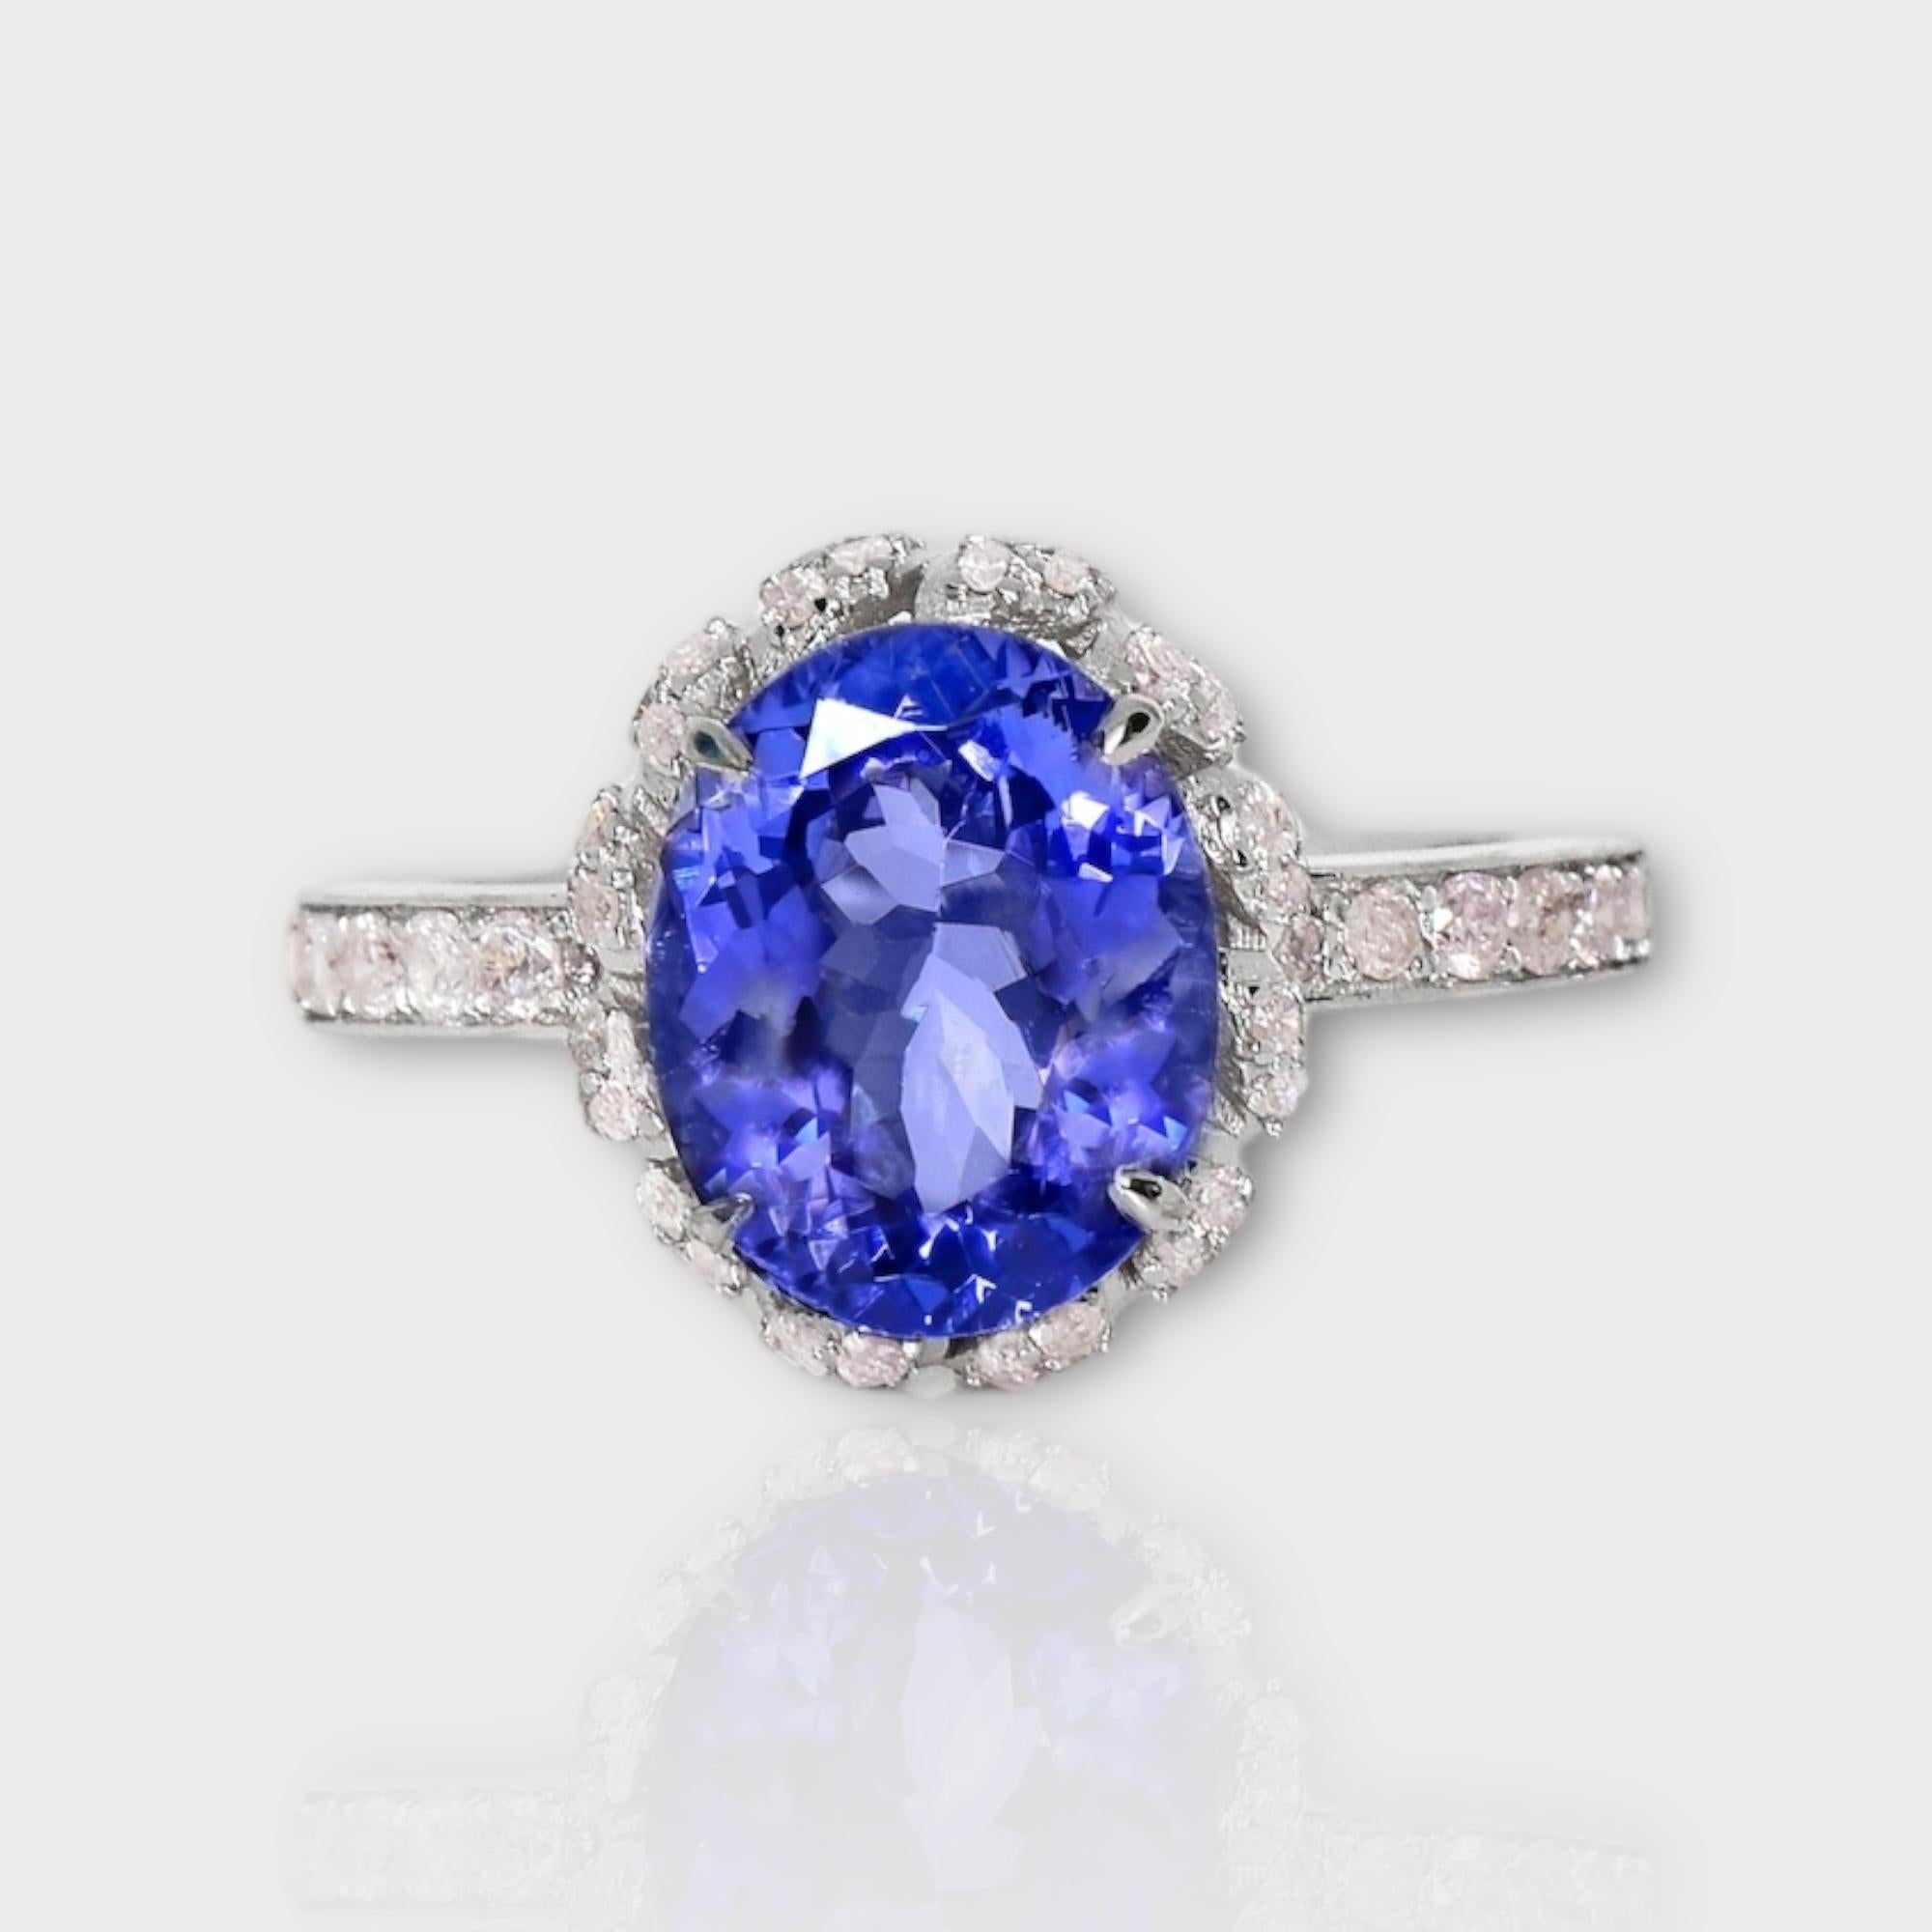 *14K 2.67 ct Tanzanite&Pink Diamond Antique Art Deco Style Engagement Ring*
The natural intense bluish violet tanzanite, weighing 2.67 ct, is the center stone surrounded by natural pink diamonds weighing 0.42 ct on the 14K white gold halo design